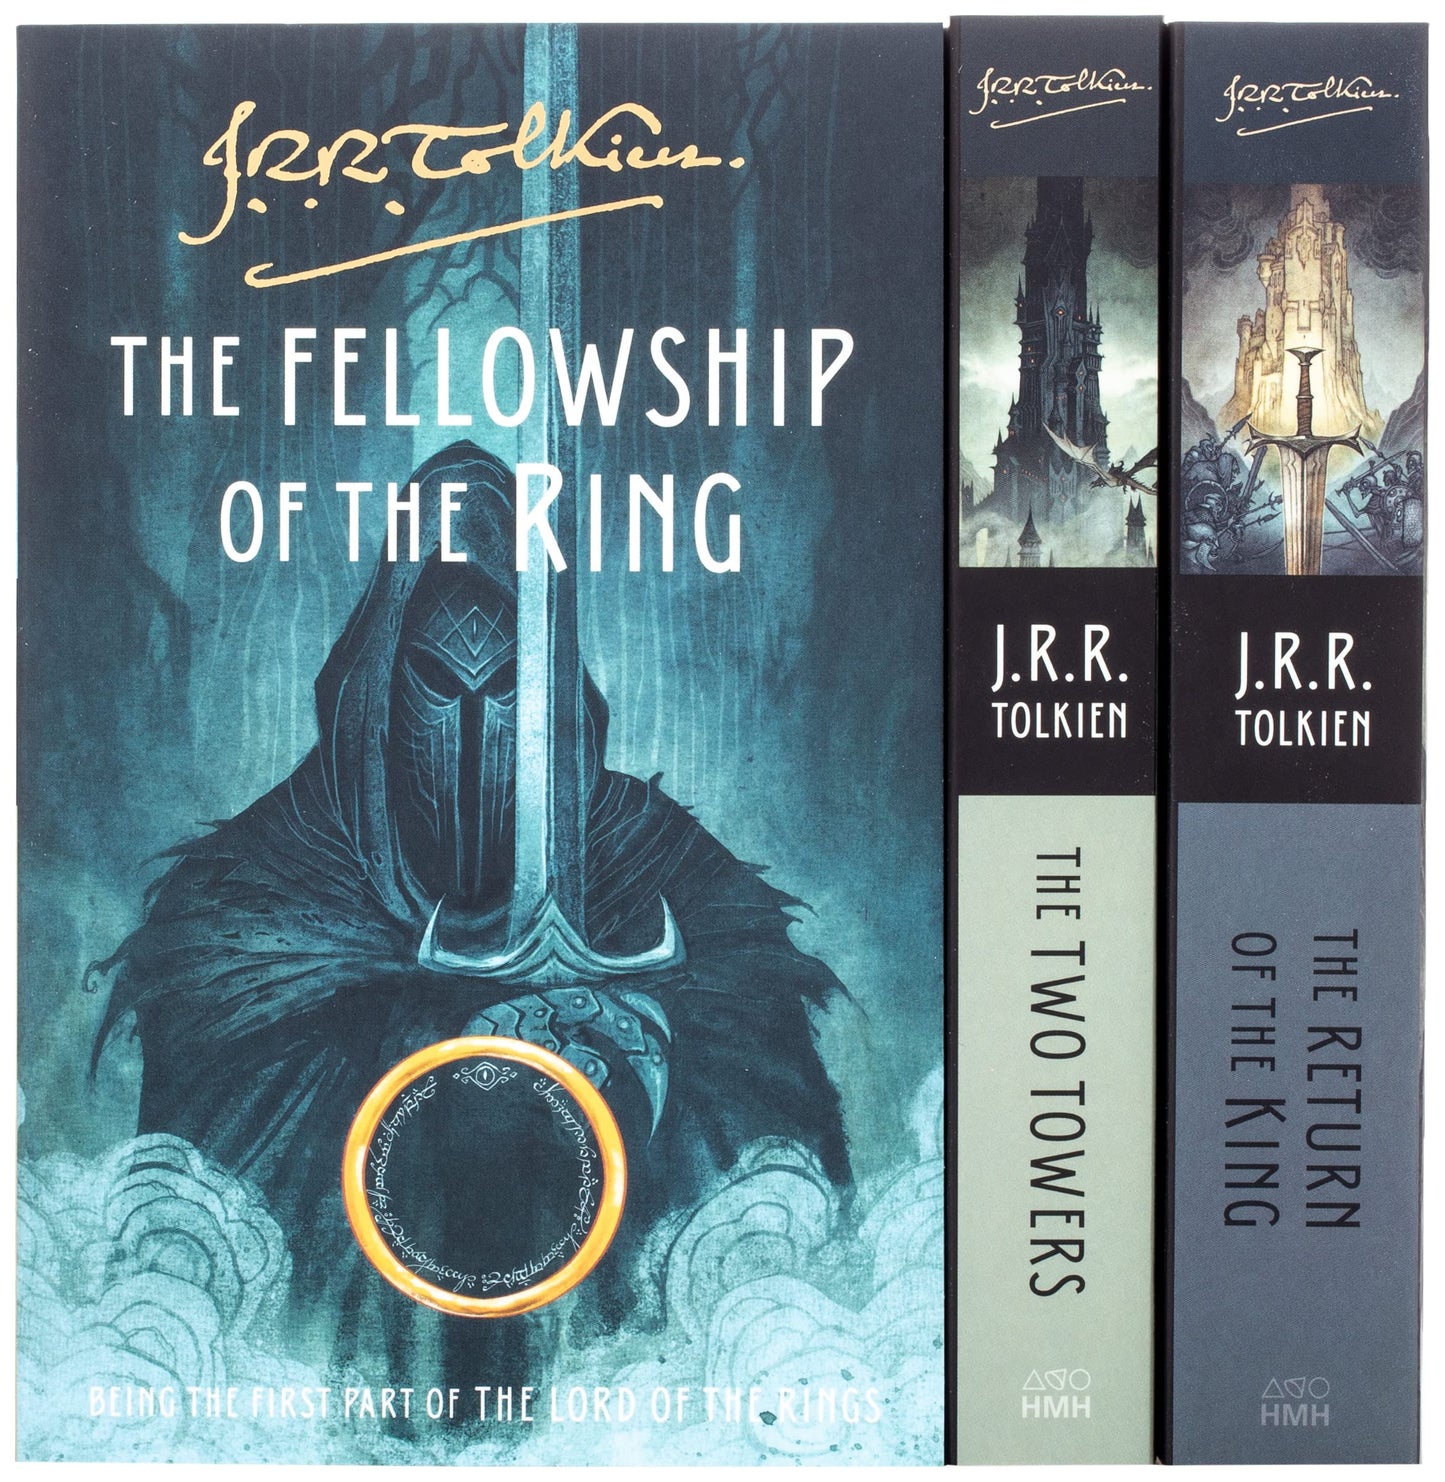 Lord of the Rings Trilogy (paperback boxset)